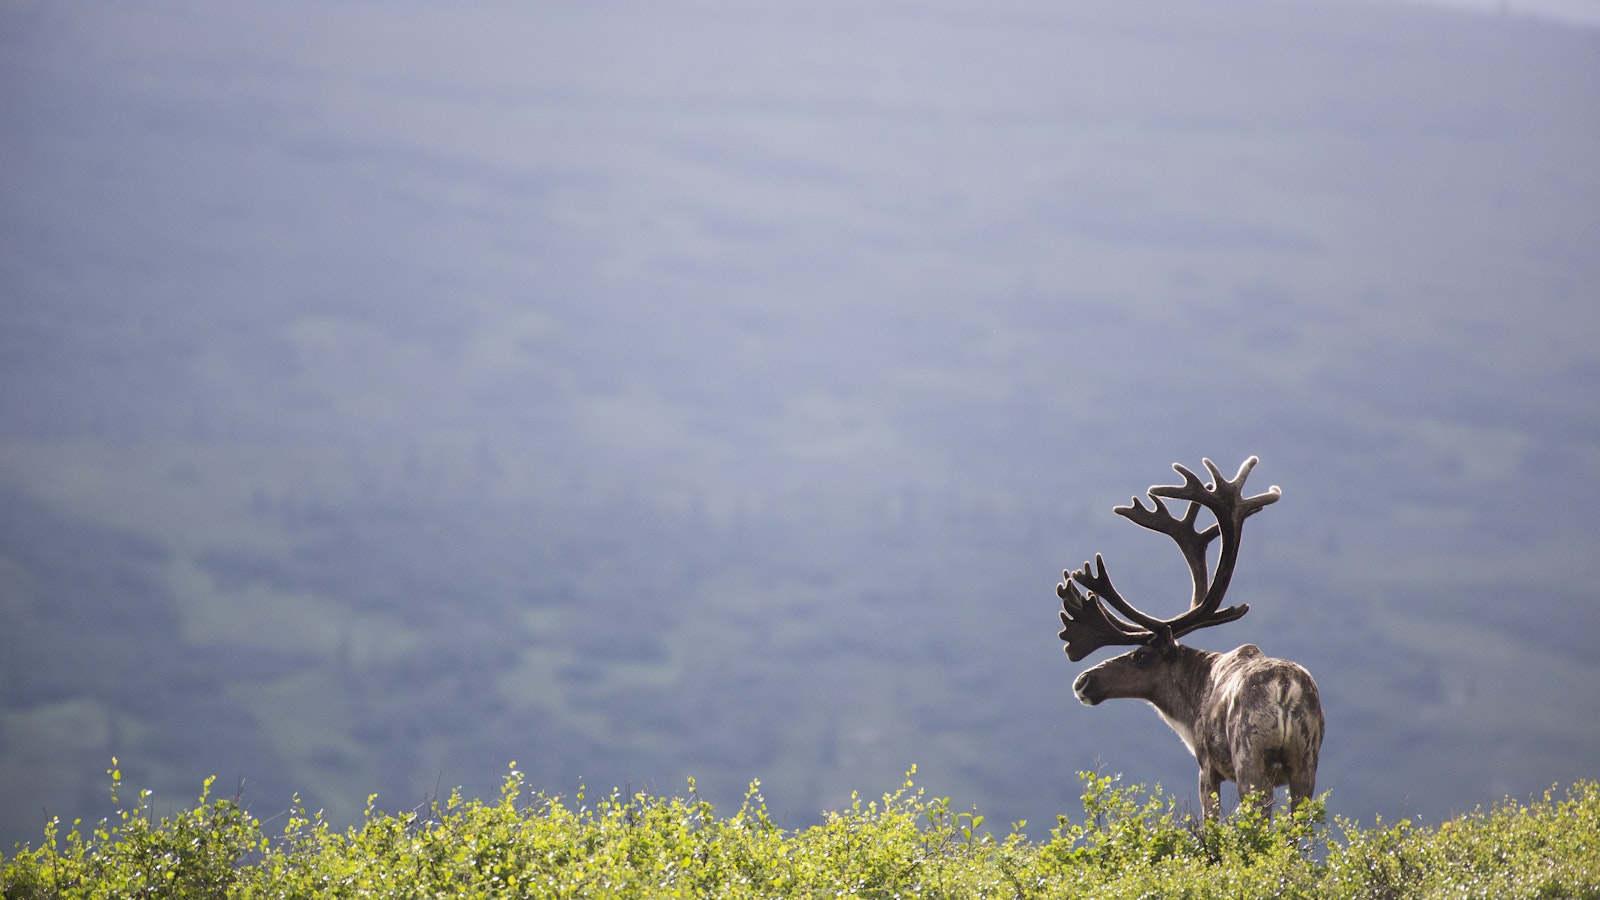 A caribou against a mountainous background